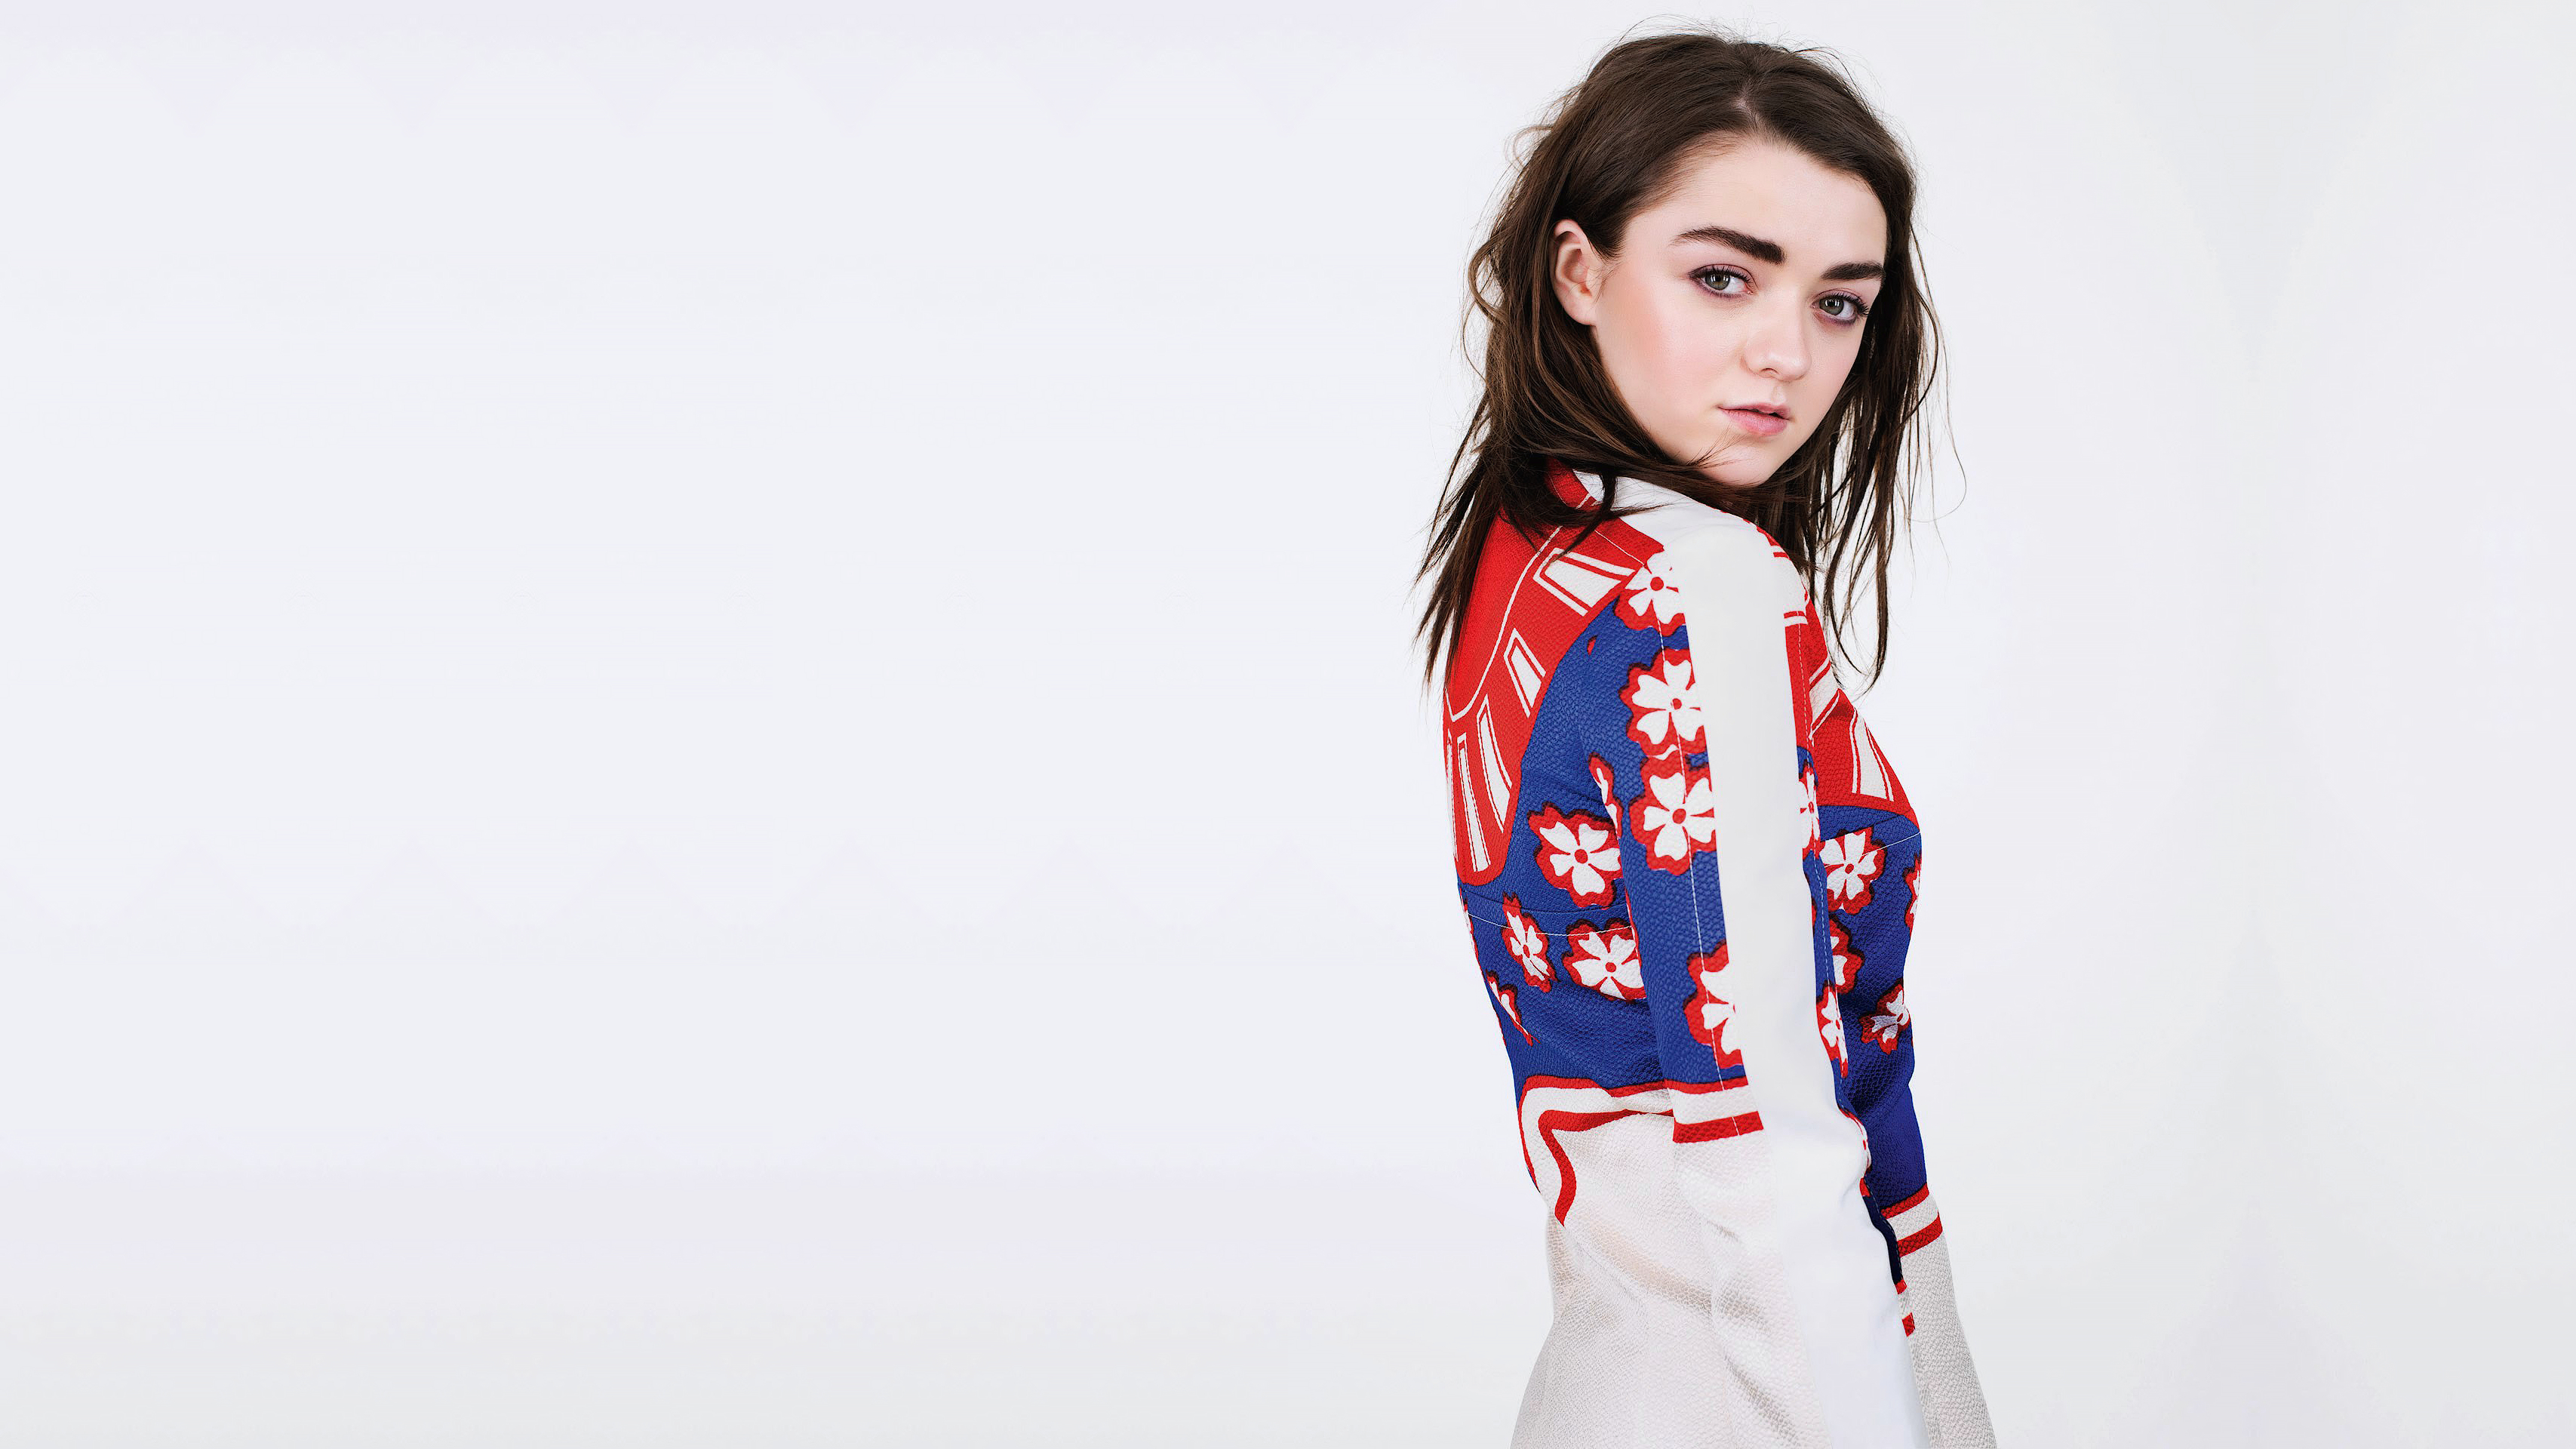 2932x2932201976 British Actress Maisie Williams 2932x2932201976 Resolution  Wallpaper, HD Celebrities 4K Wallpapers, Images, Photos and Background -  Wallpapers Den